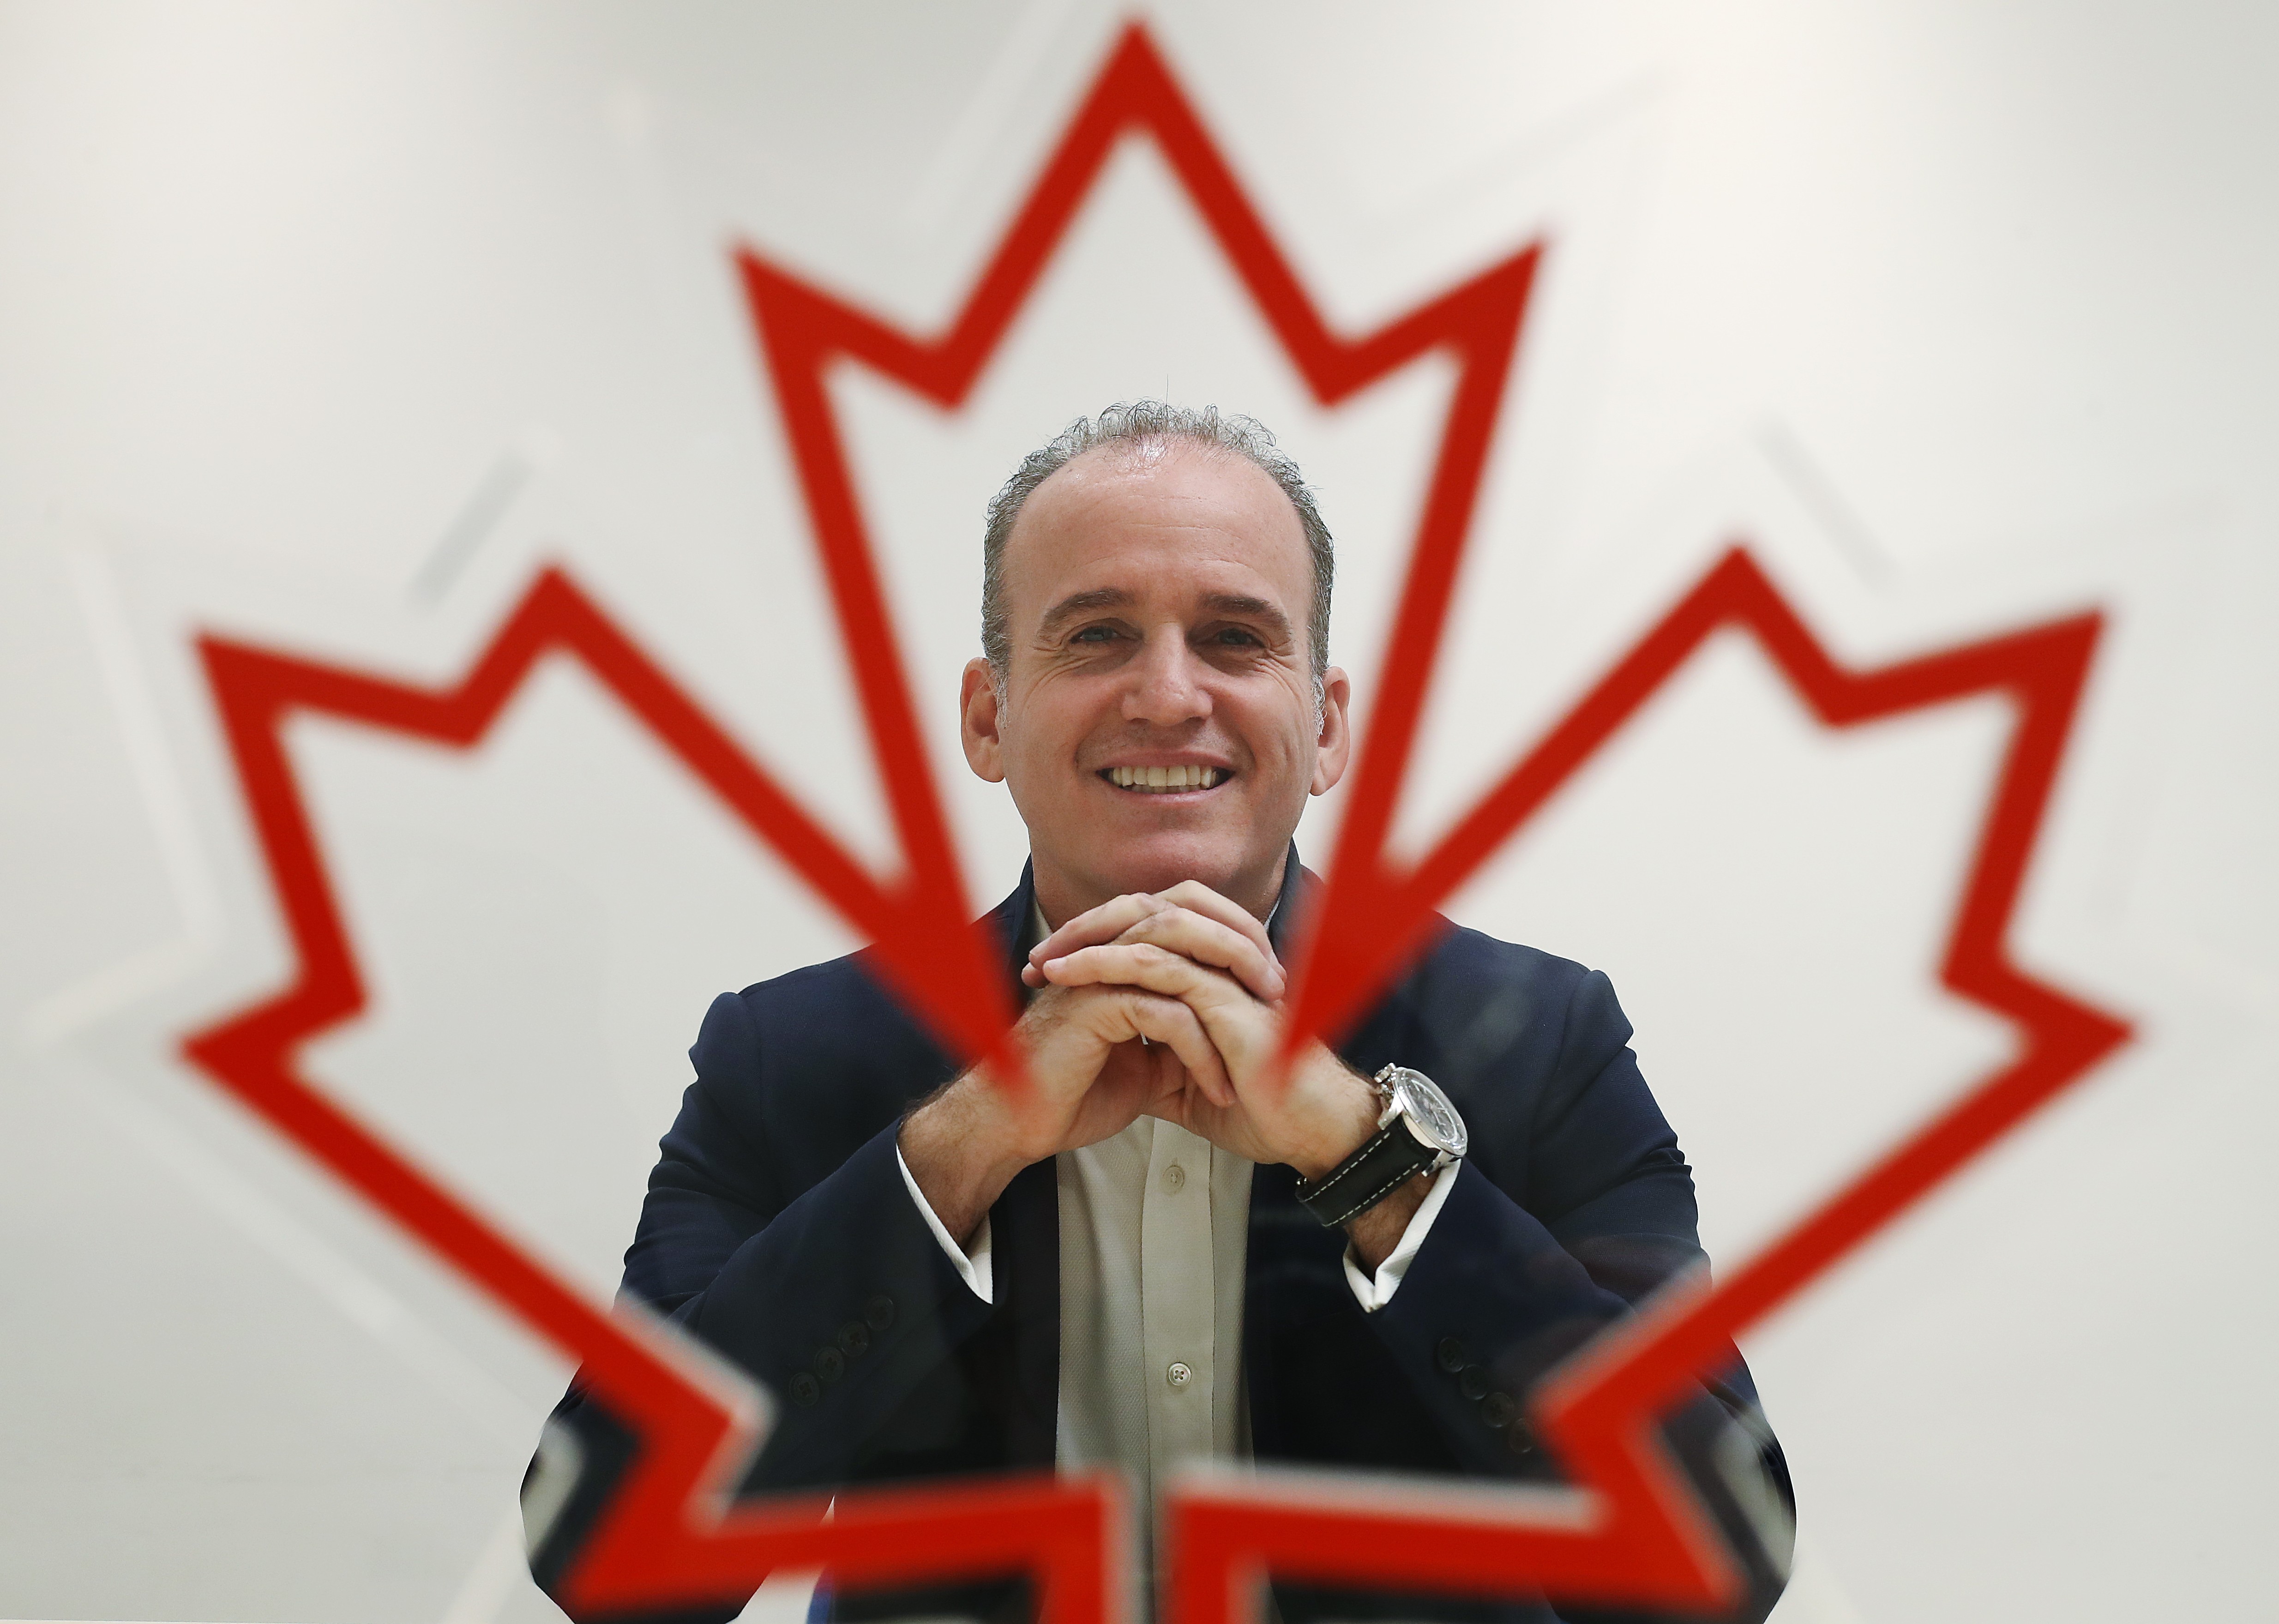 Todd Handcock is the new chairman of the Canadian Chamber of Commerce in Hong Kong. Photo: Nora Tam